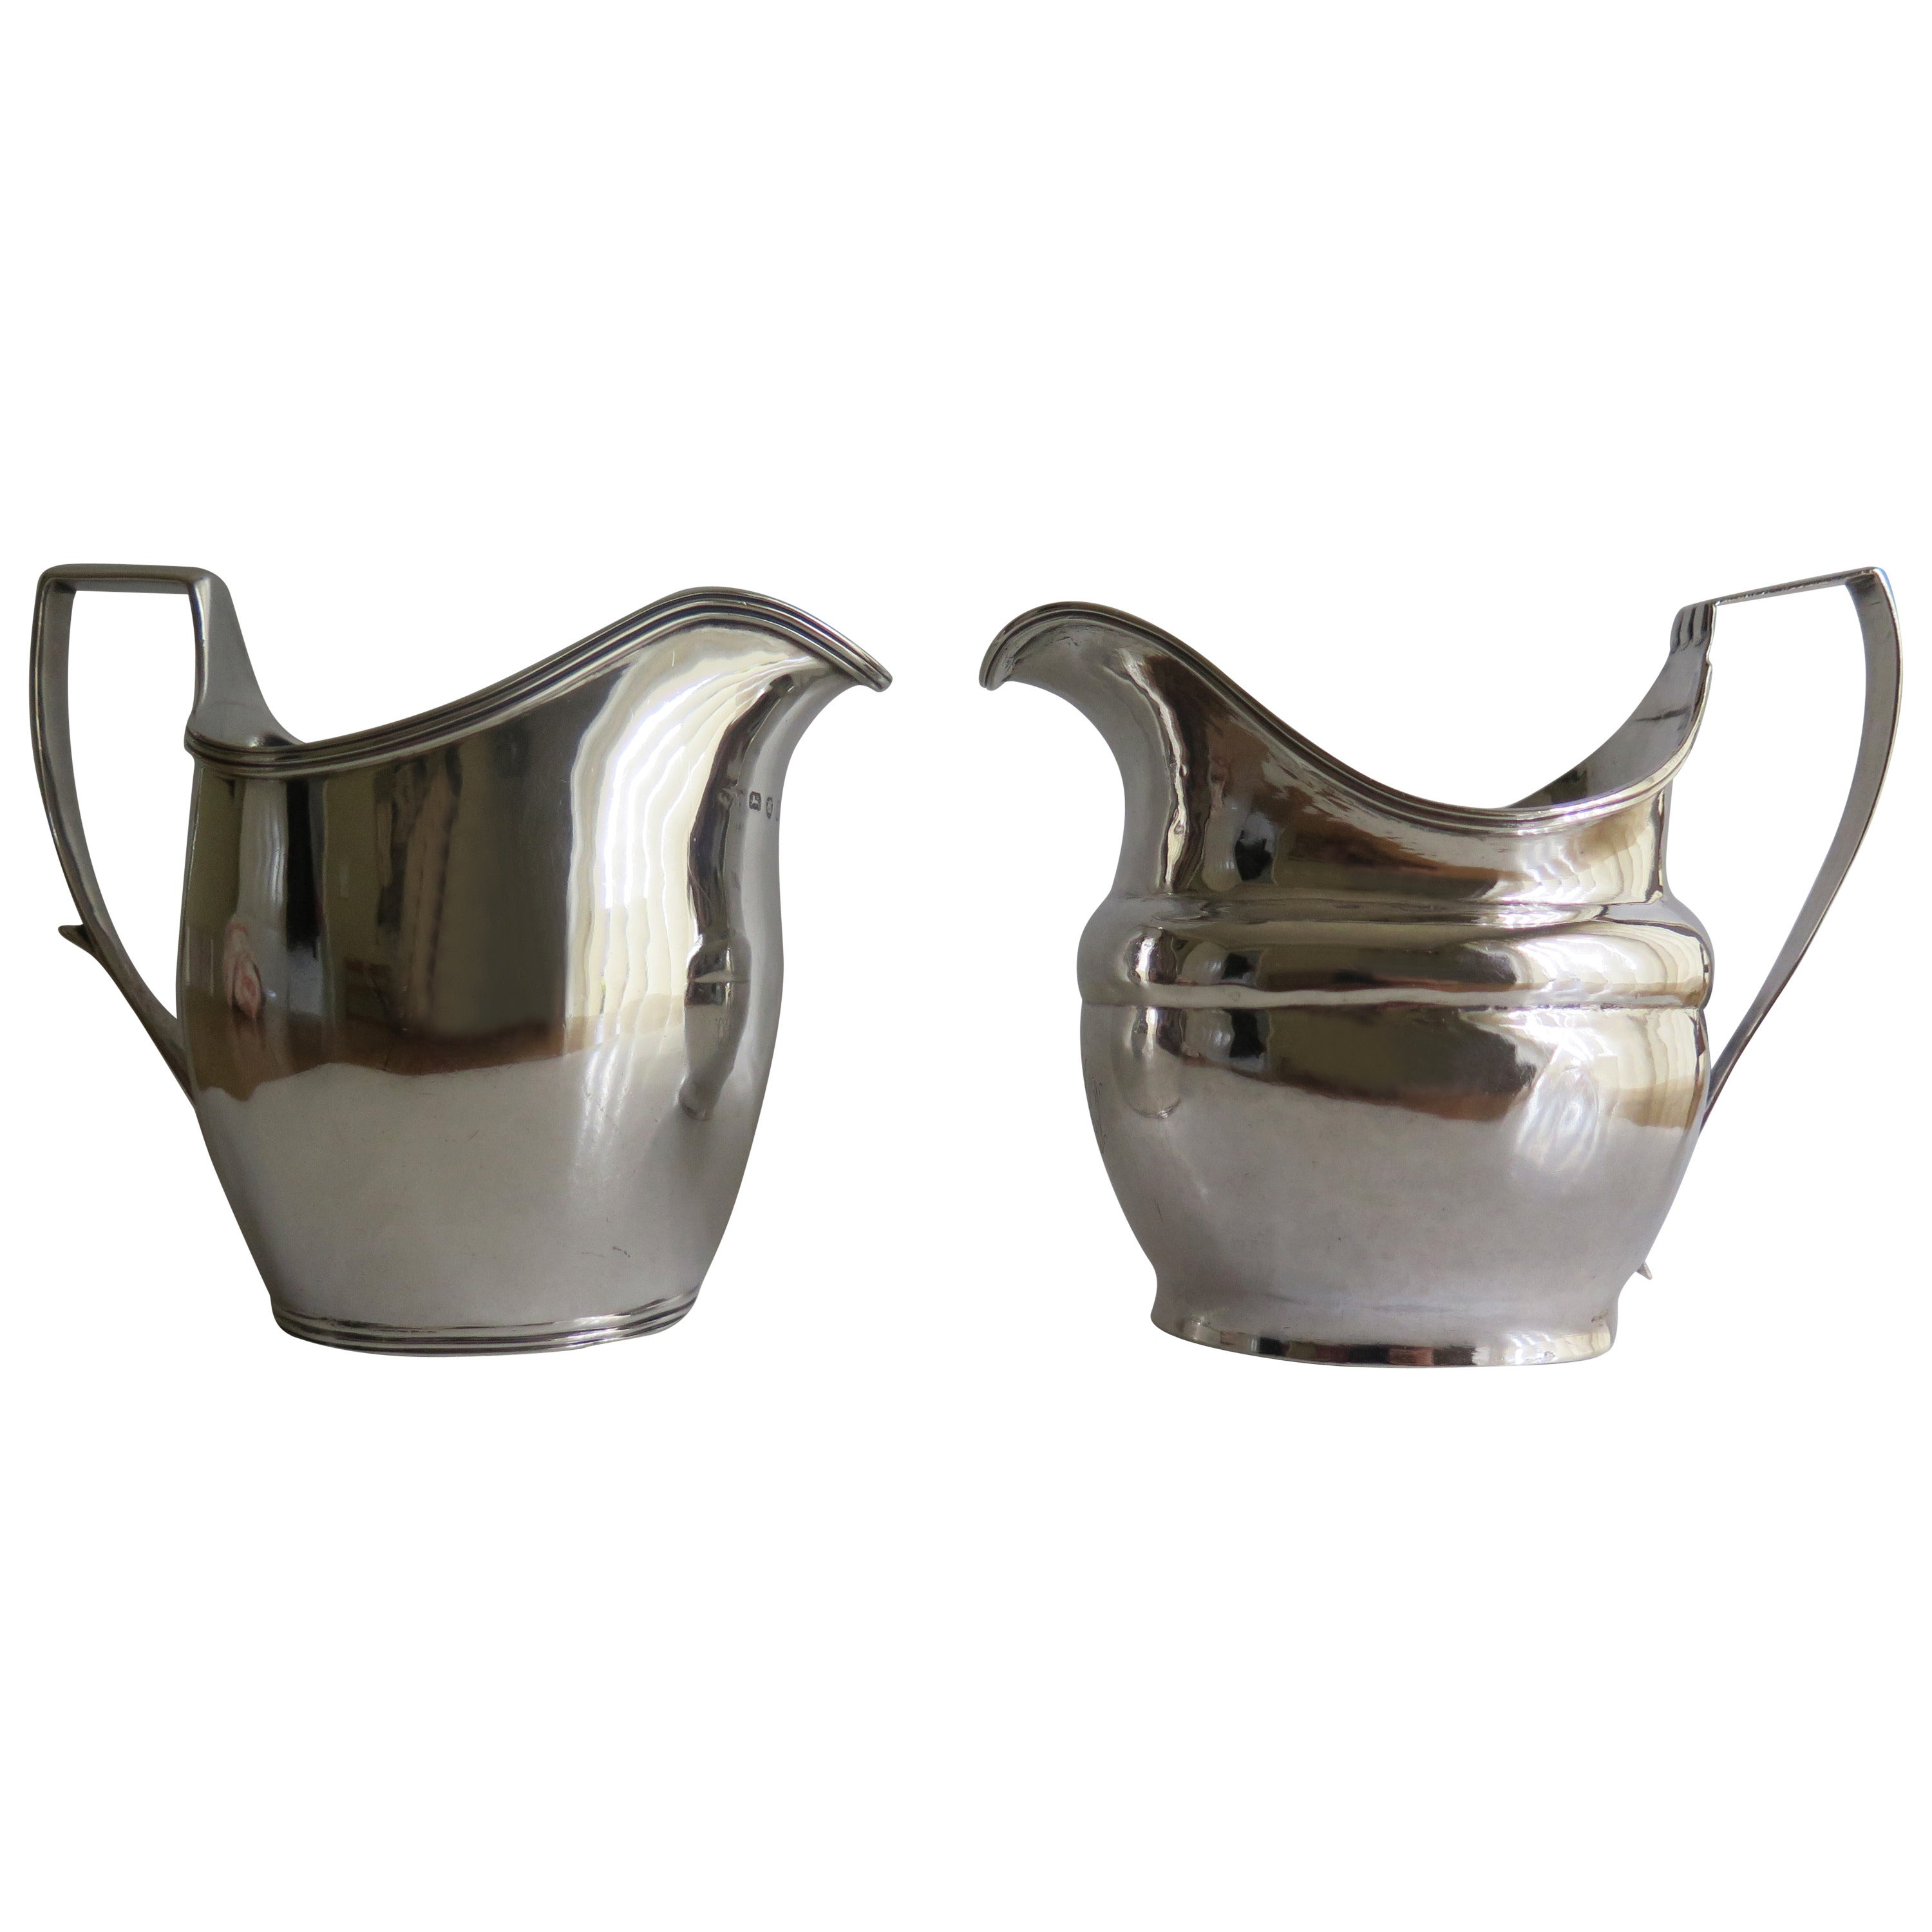 TWO Georgian, Sterling Silver, Milk or Cream Jugs, London Makers, 1801 and 1805